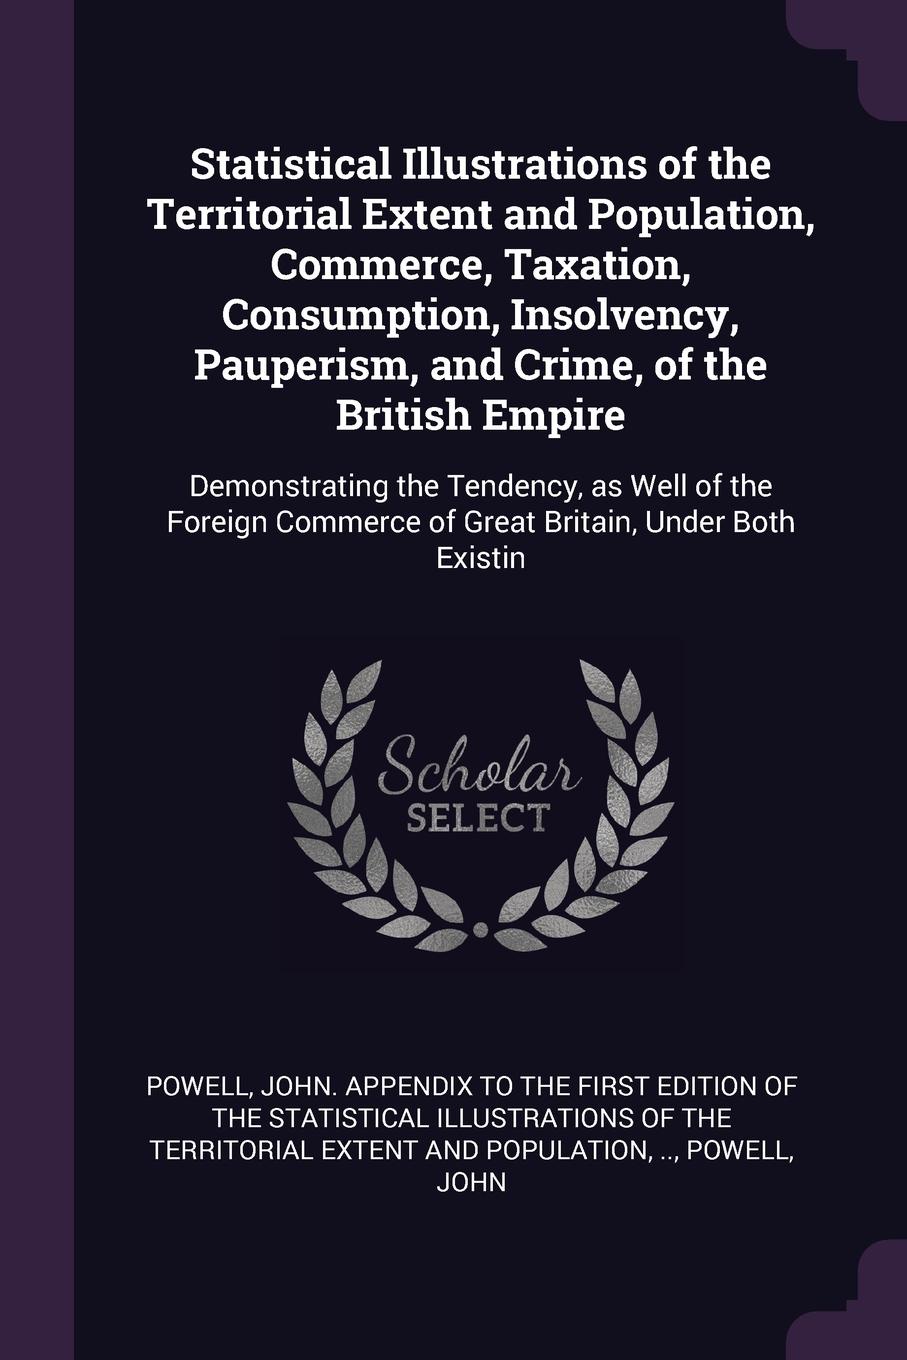 Statistical Illustrations of the Territorial Extent and Population, Commerce, Taxation, Consumption, Insolvency, Pauperism, and Crime, of the British Empire. Demonstrating the Tendency, as Well of the Foreign Commerce of Great Britain, Under Both ...